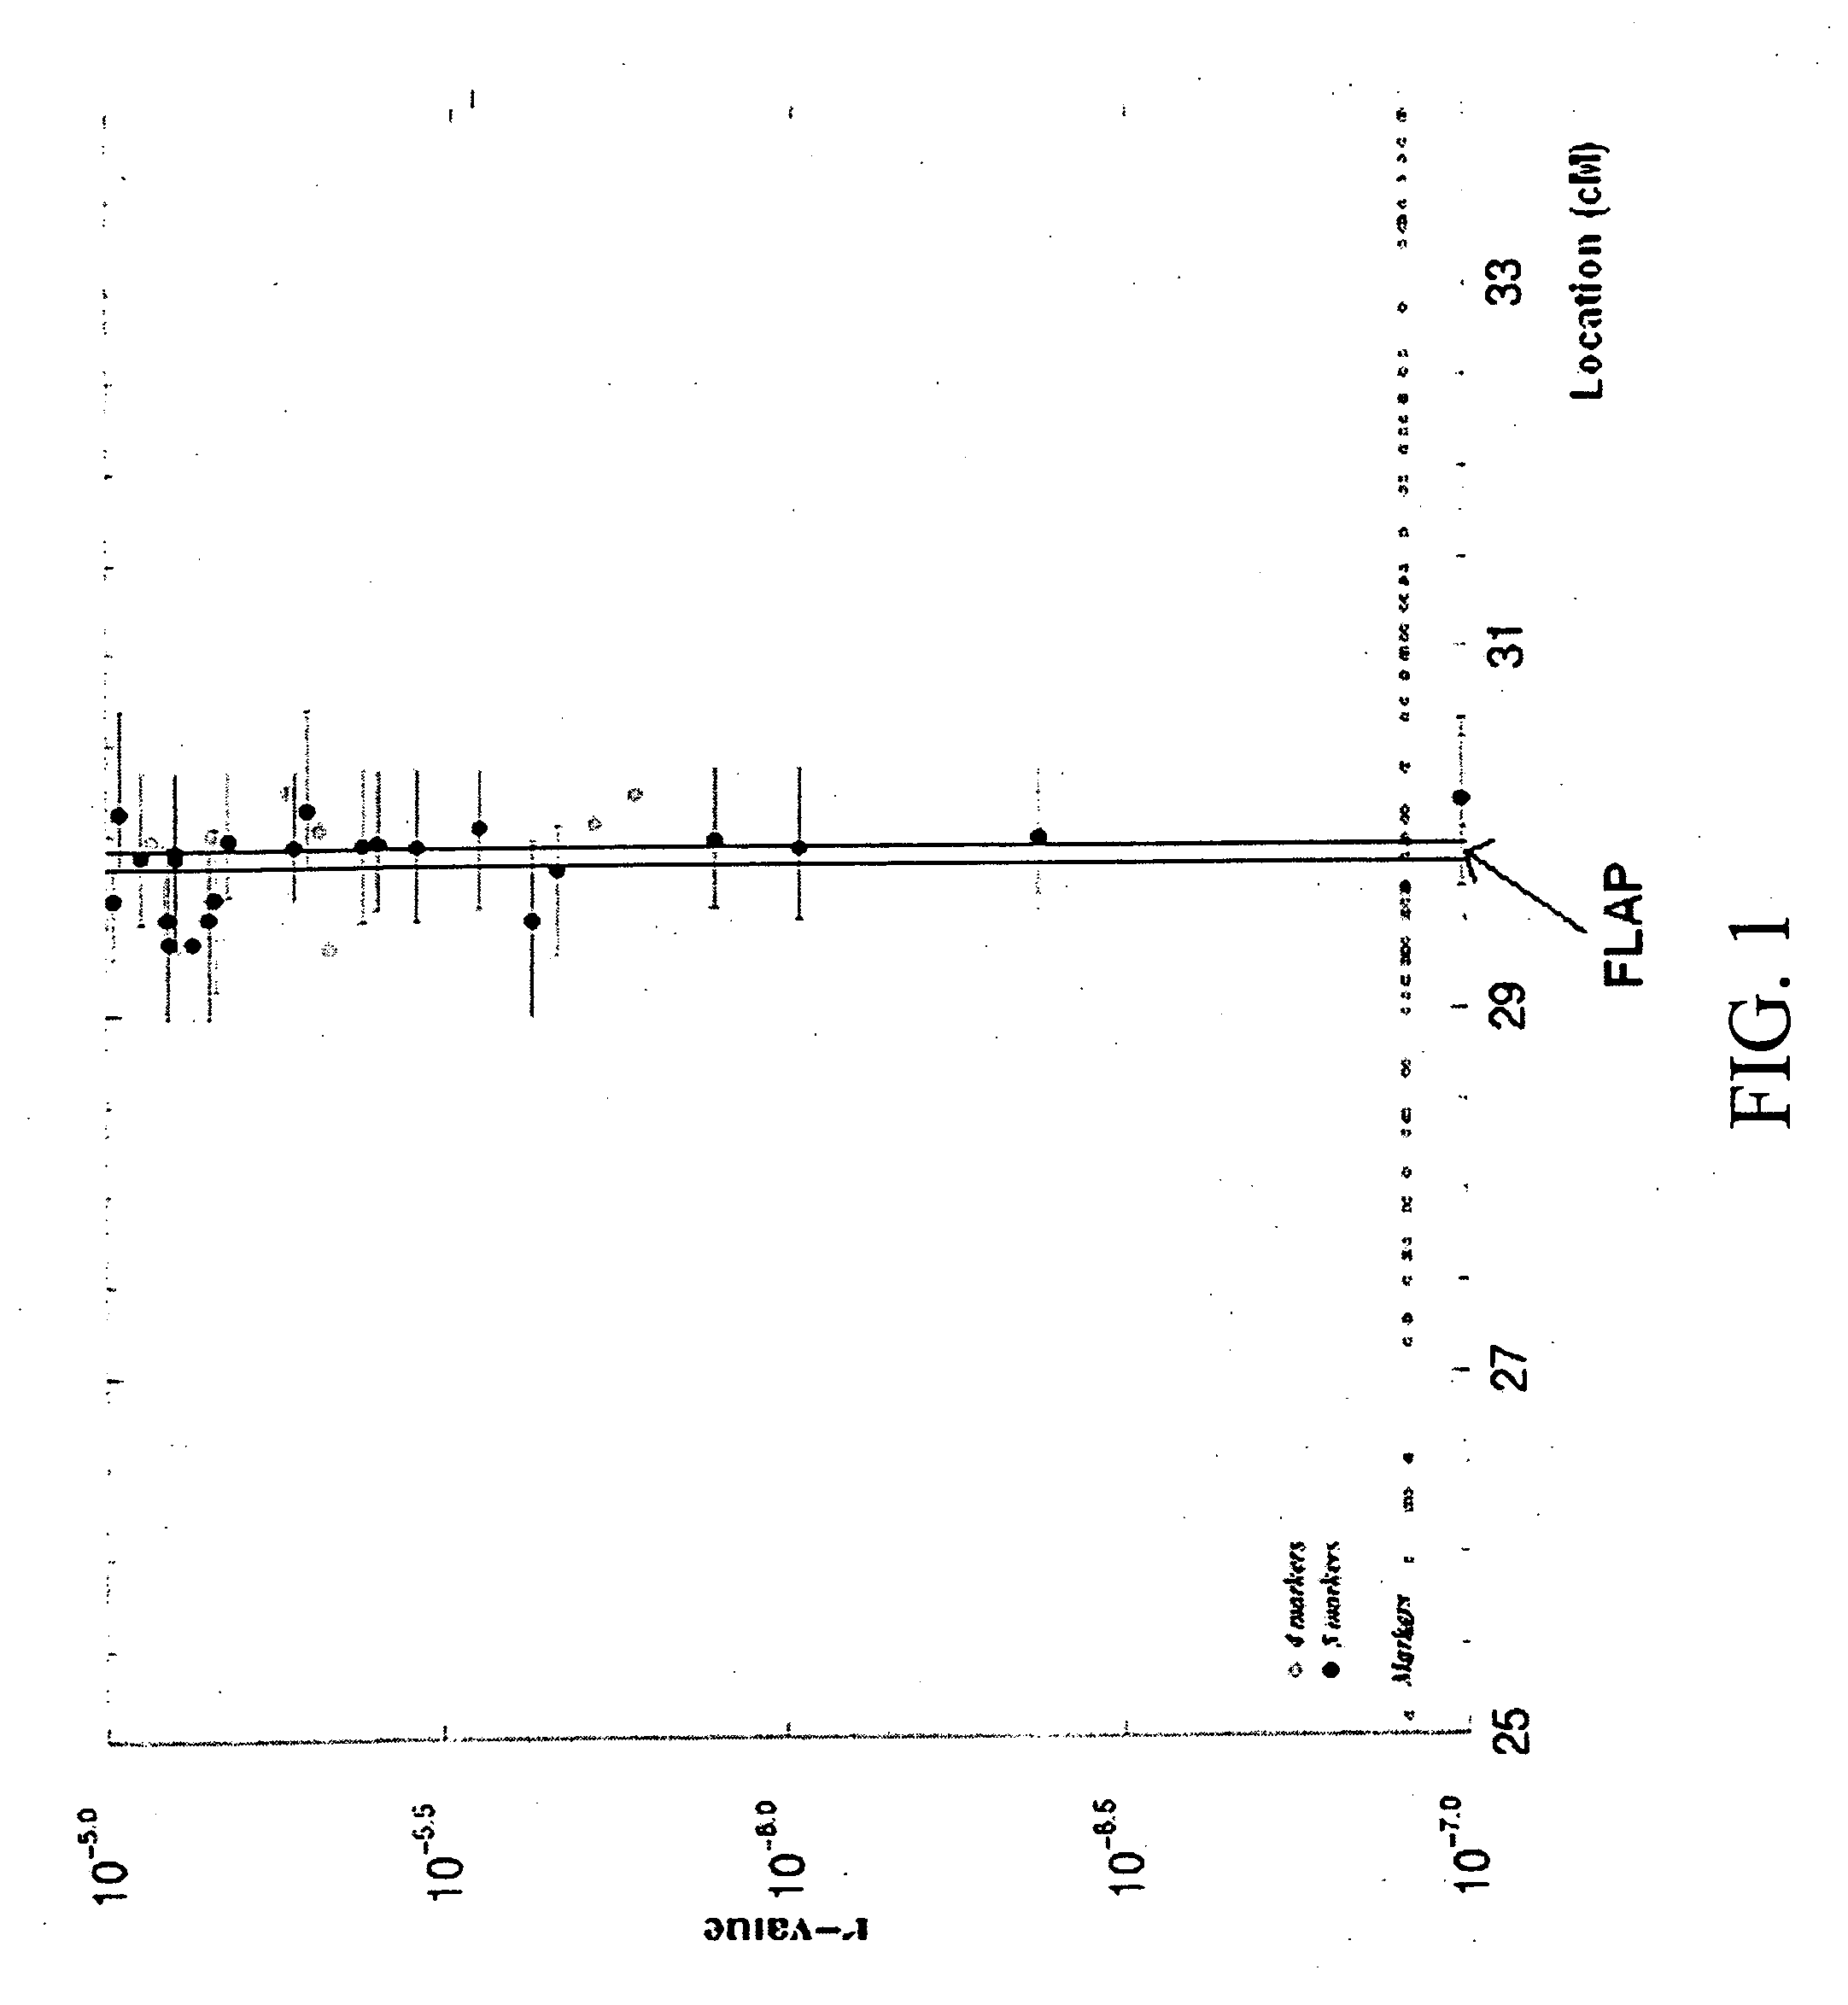 Susceptibility gene for myocardial infarction, stroke, and PAOD, methods of treatment